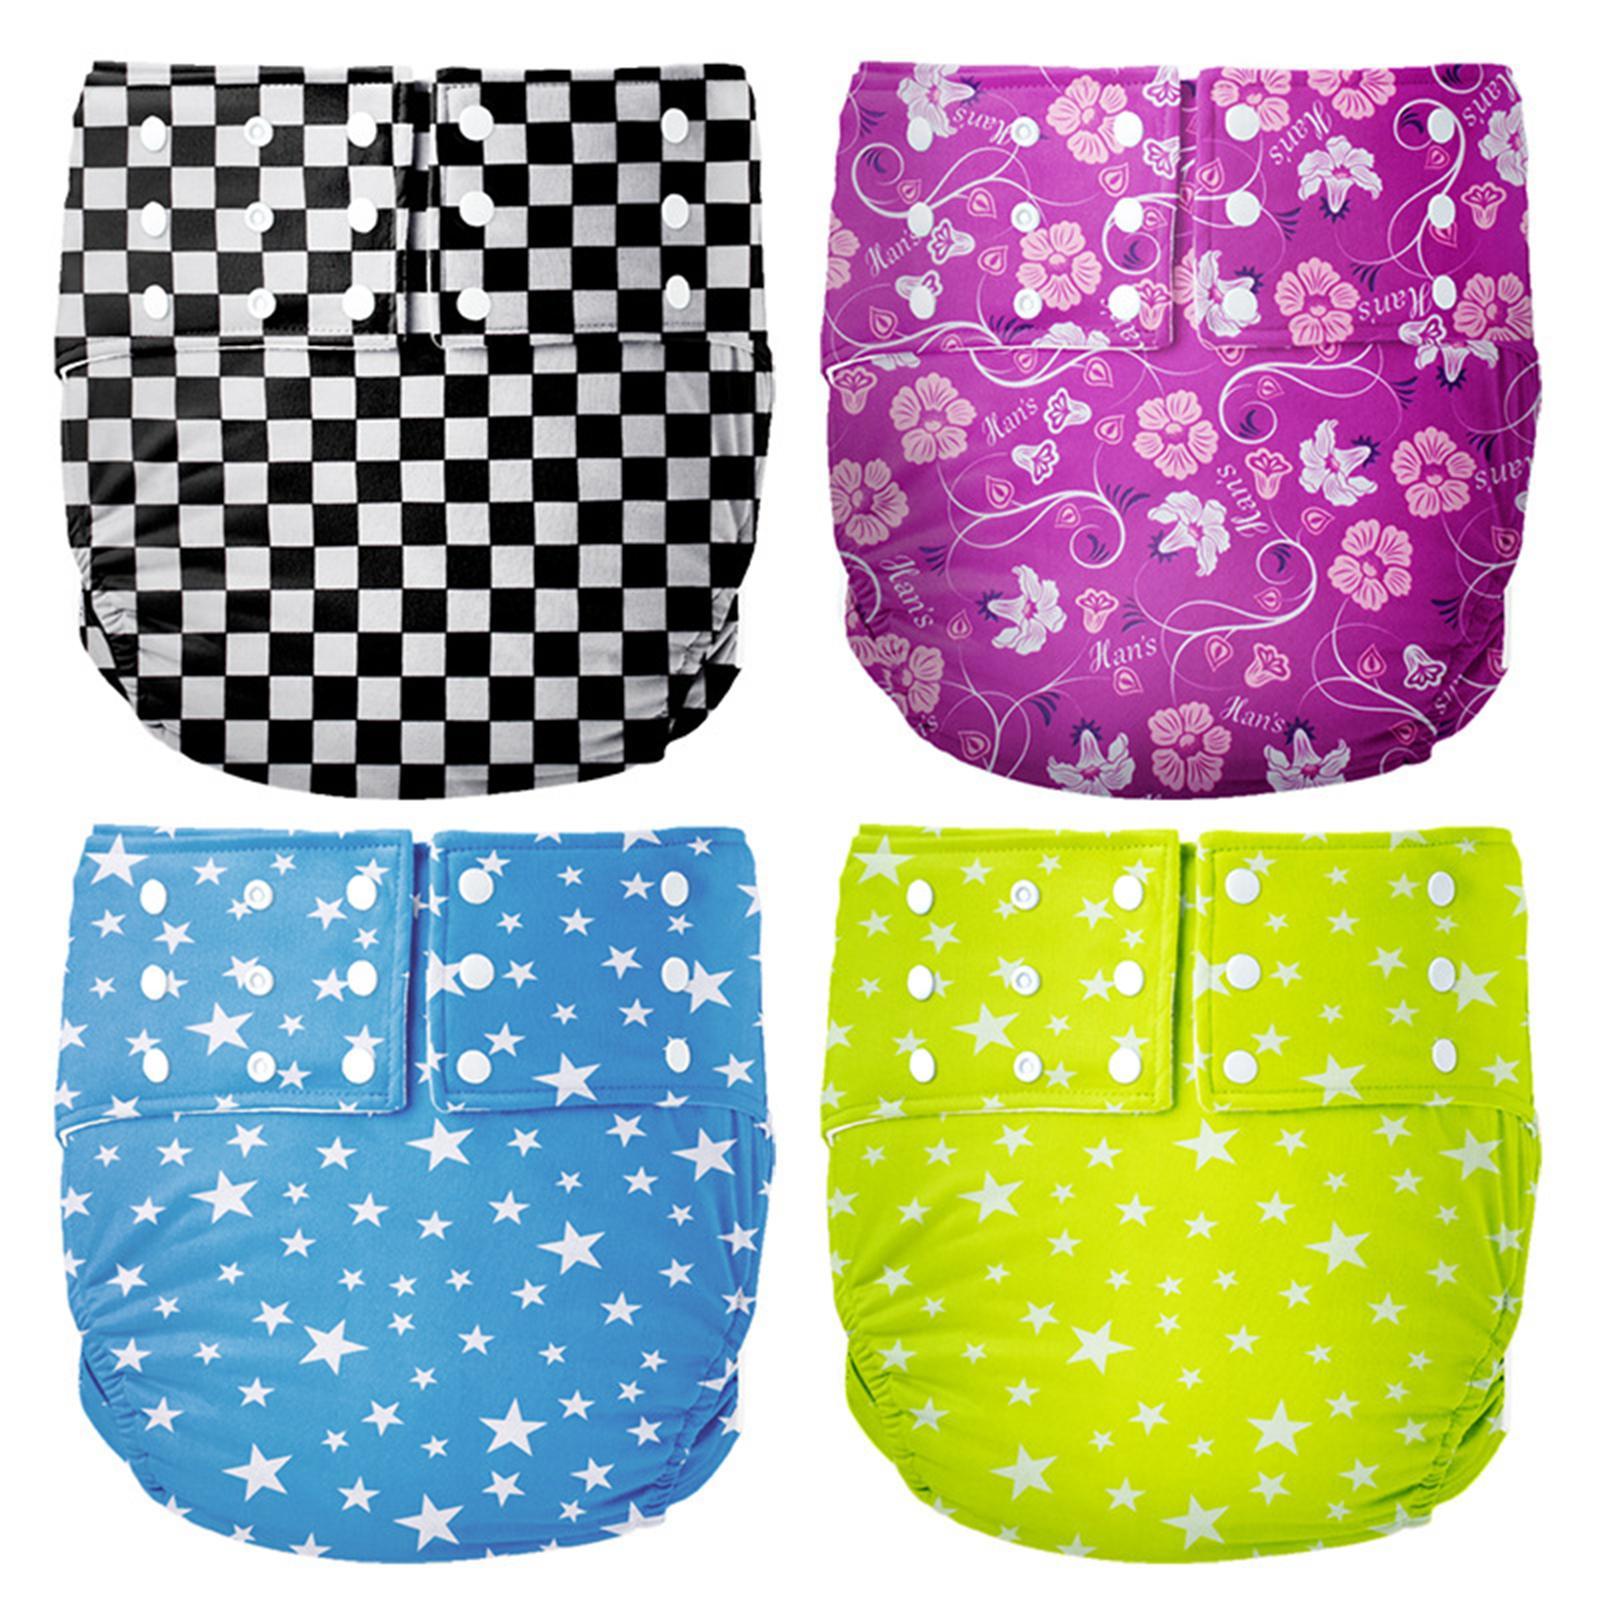 2Pcs Adjustable Adult Pocket Nappy Cover for Incontinence Washable